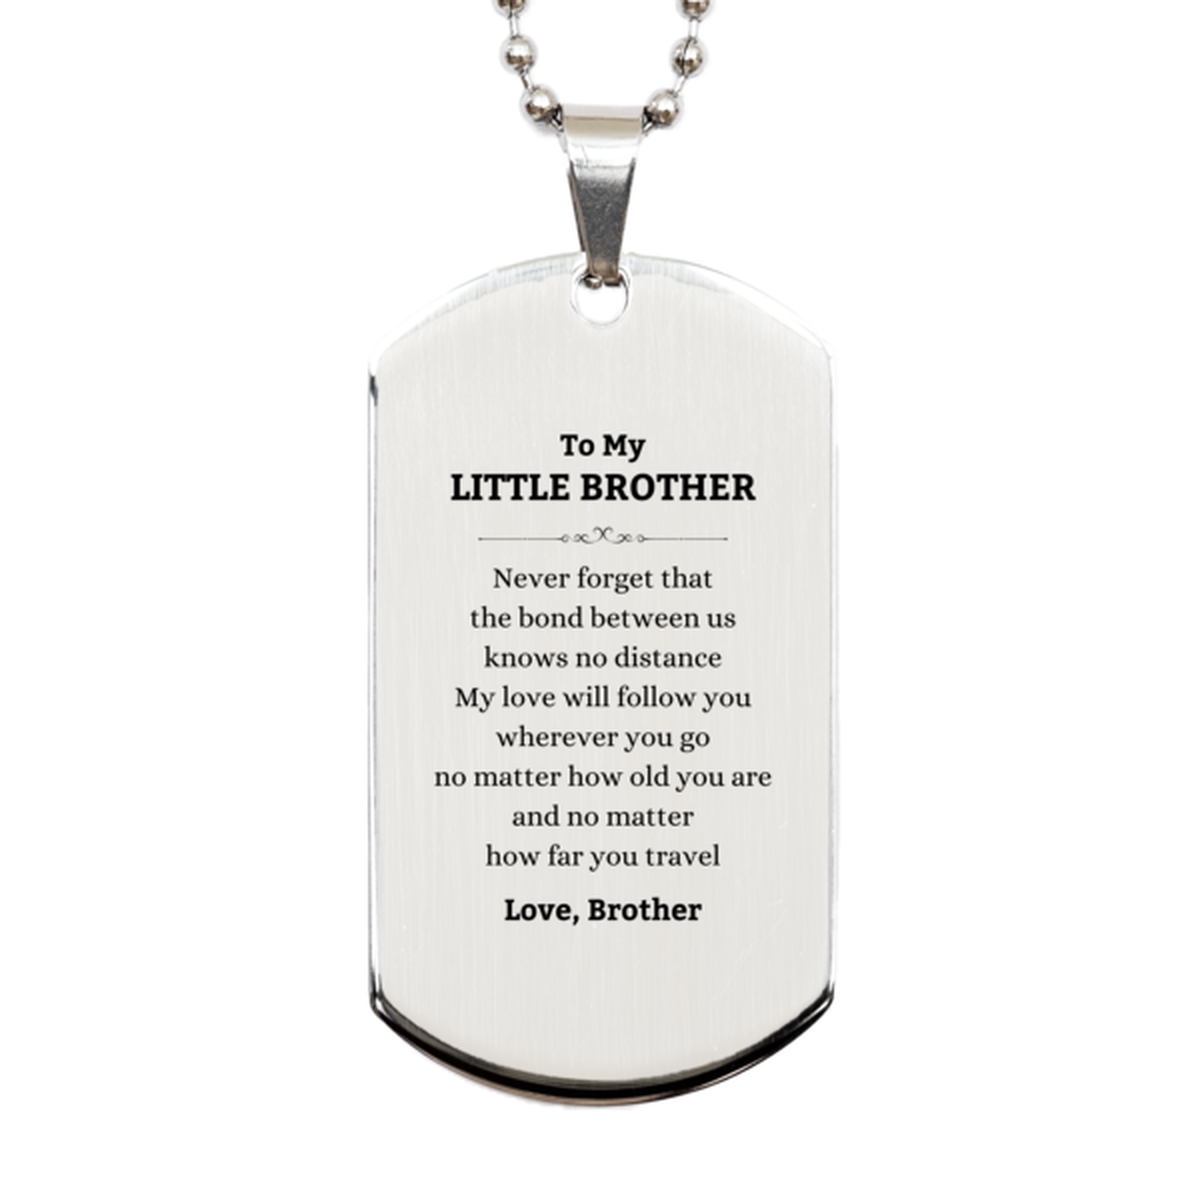 Little Brother Birthday Gifts from Brother, Adjustable Silver Dog Tag for Little Brother Christmas Graduation Unique Gifts Little Brother Never forget that the bond between us knows no distance. Love, Brother